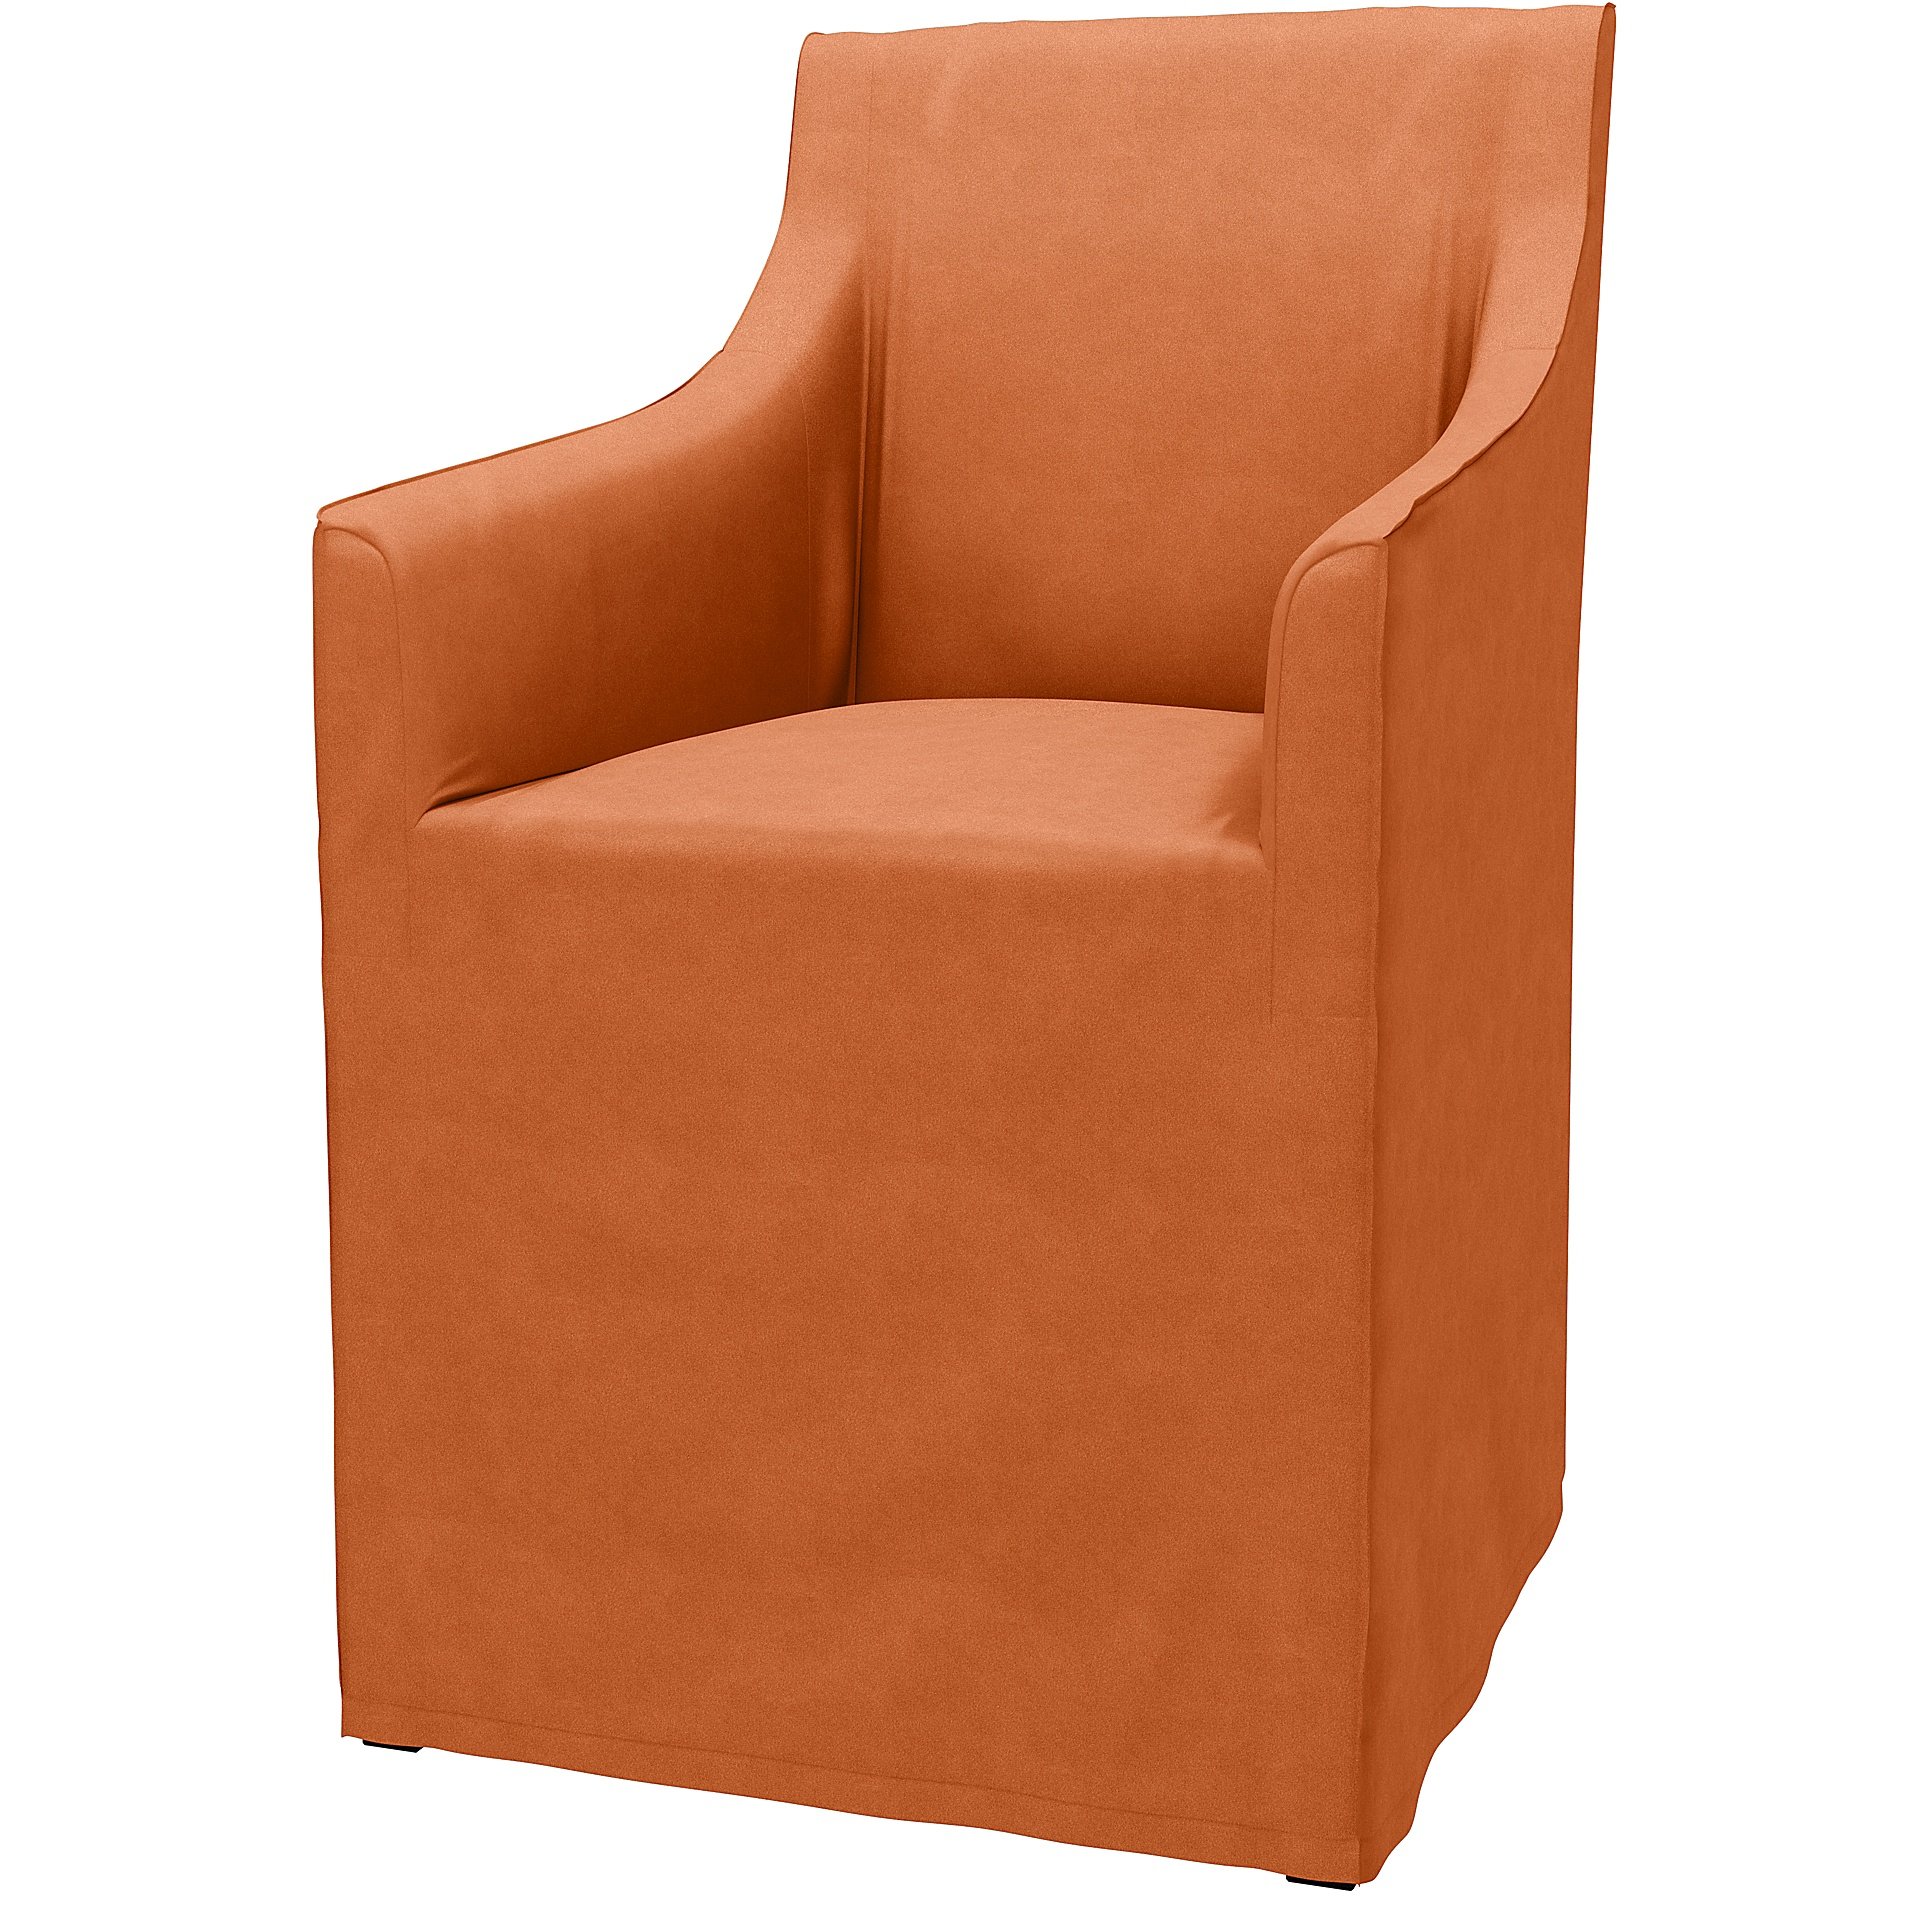 IKEA - Sakarias Chair with Armrests Cover, Rust, Outdoor - Bemz